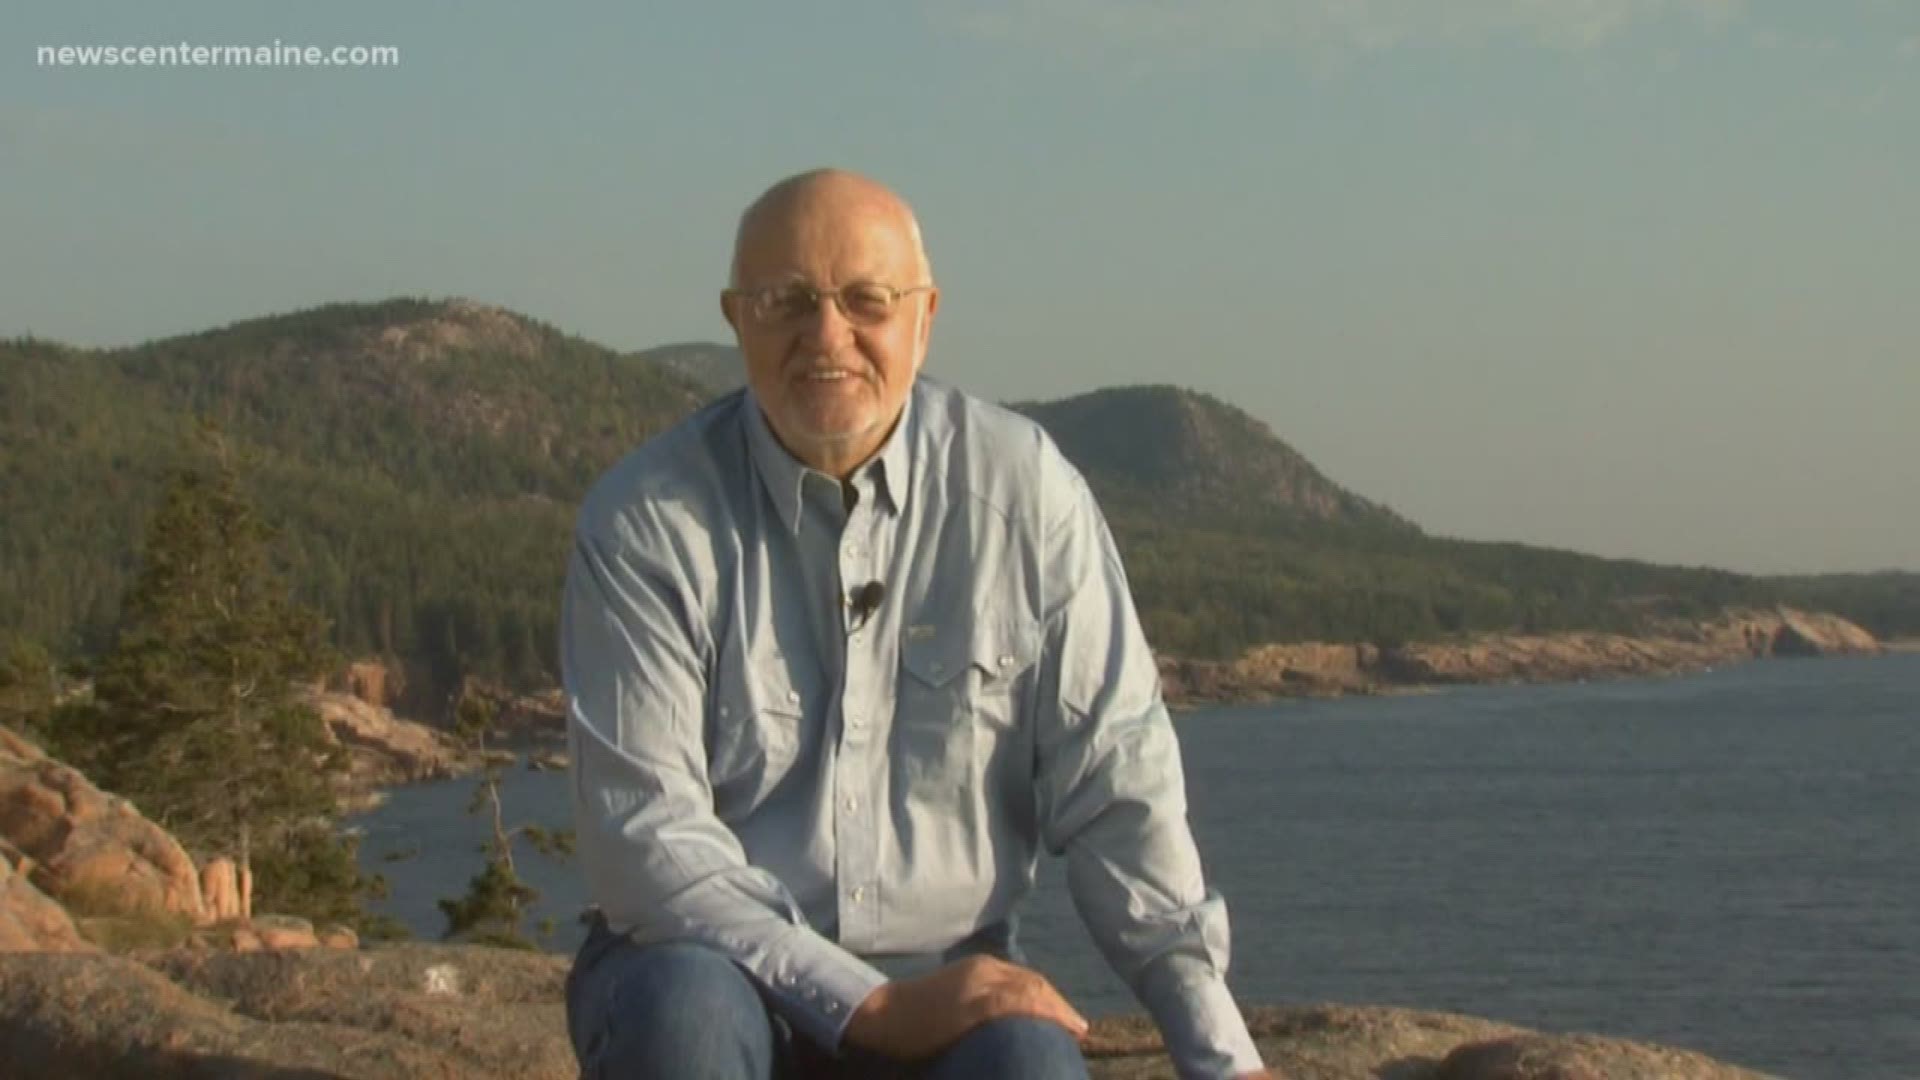 Millions came to know Maine through the documentaries Jack Perkins narrated.